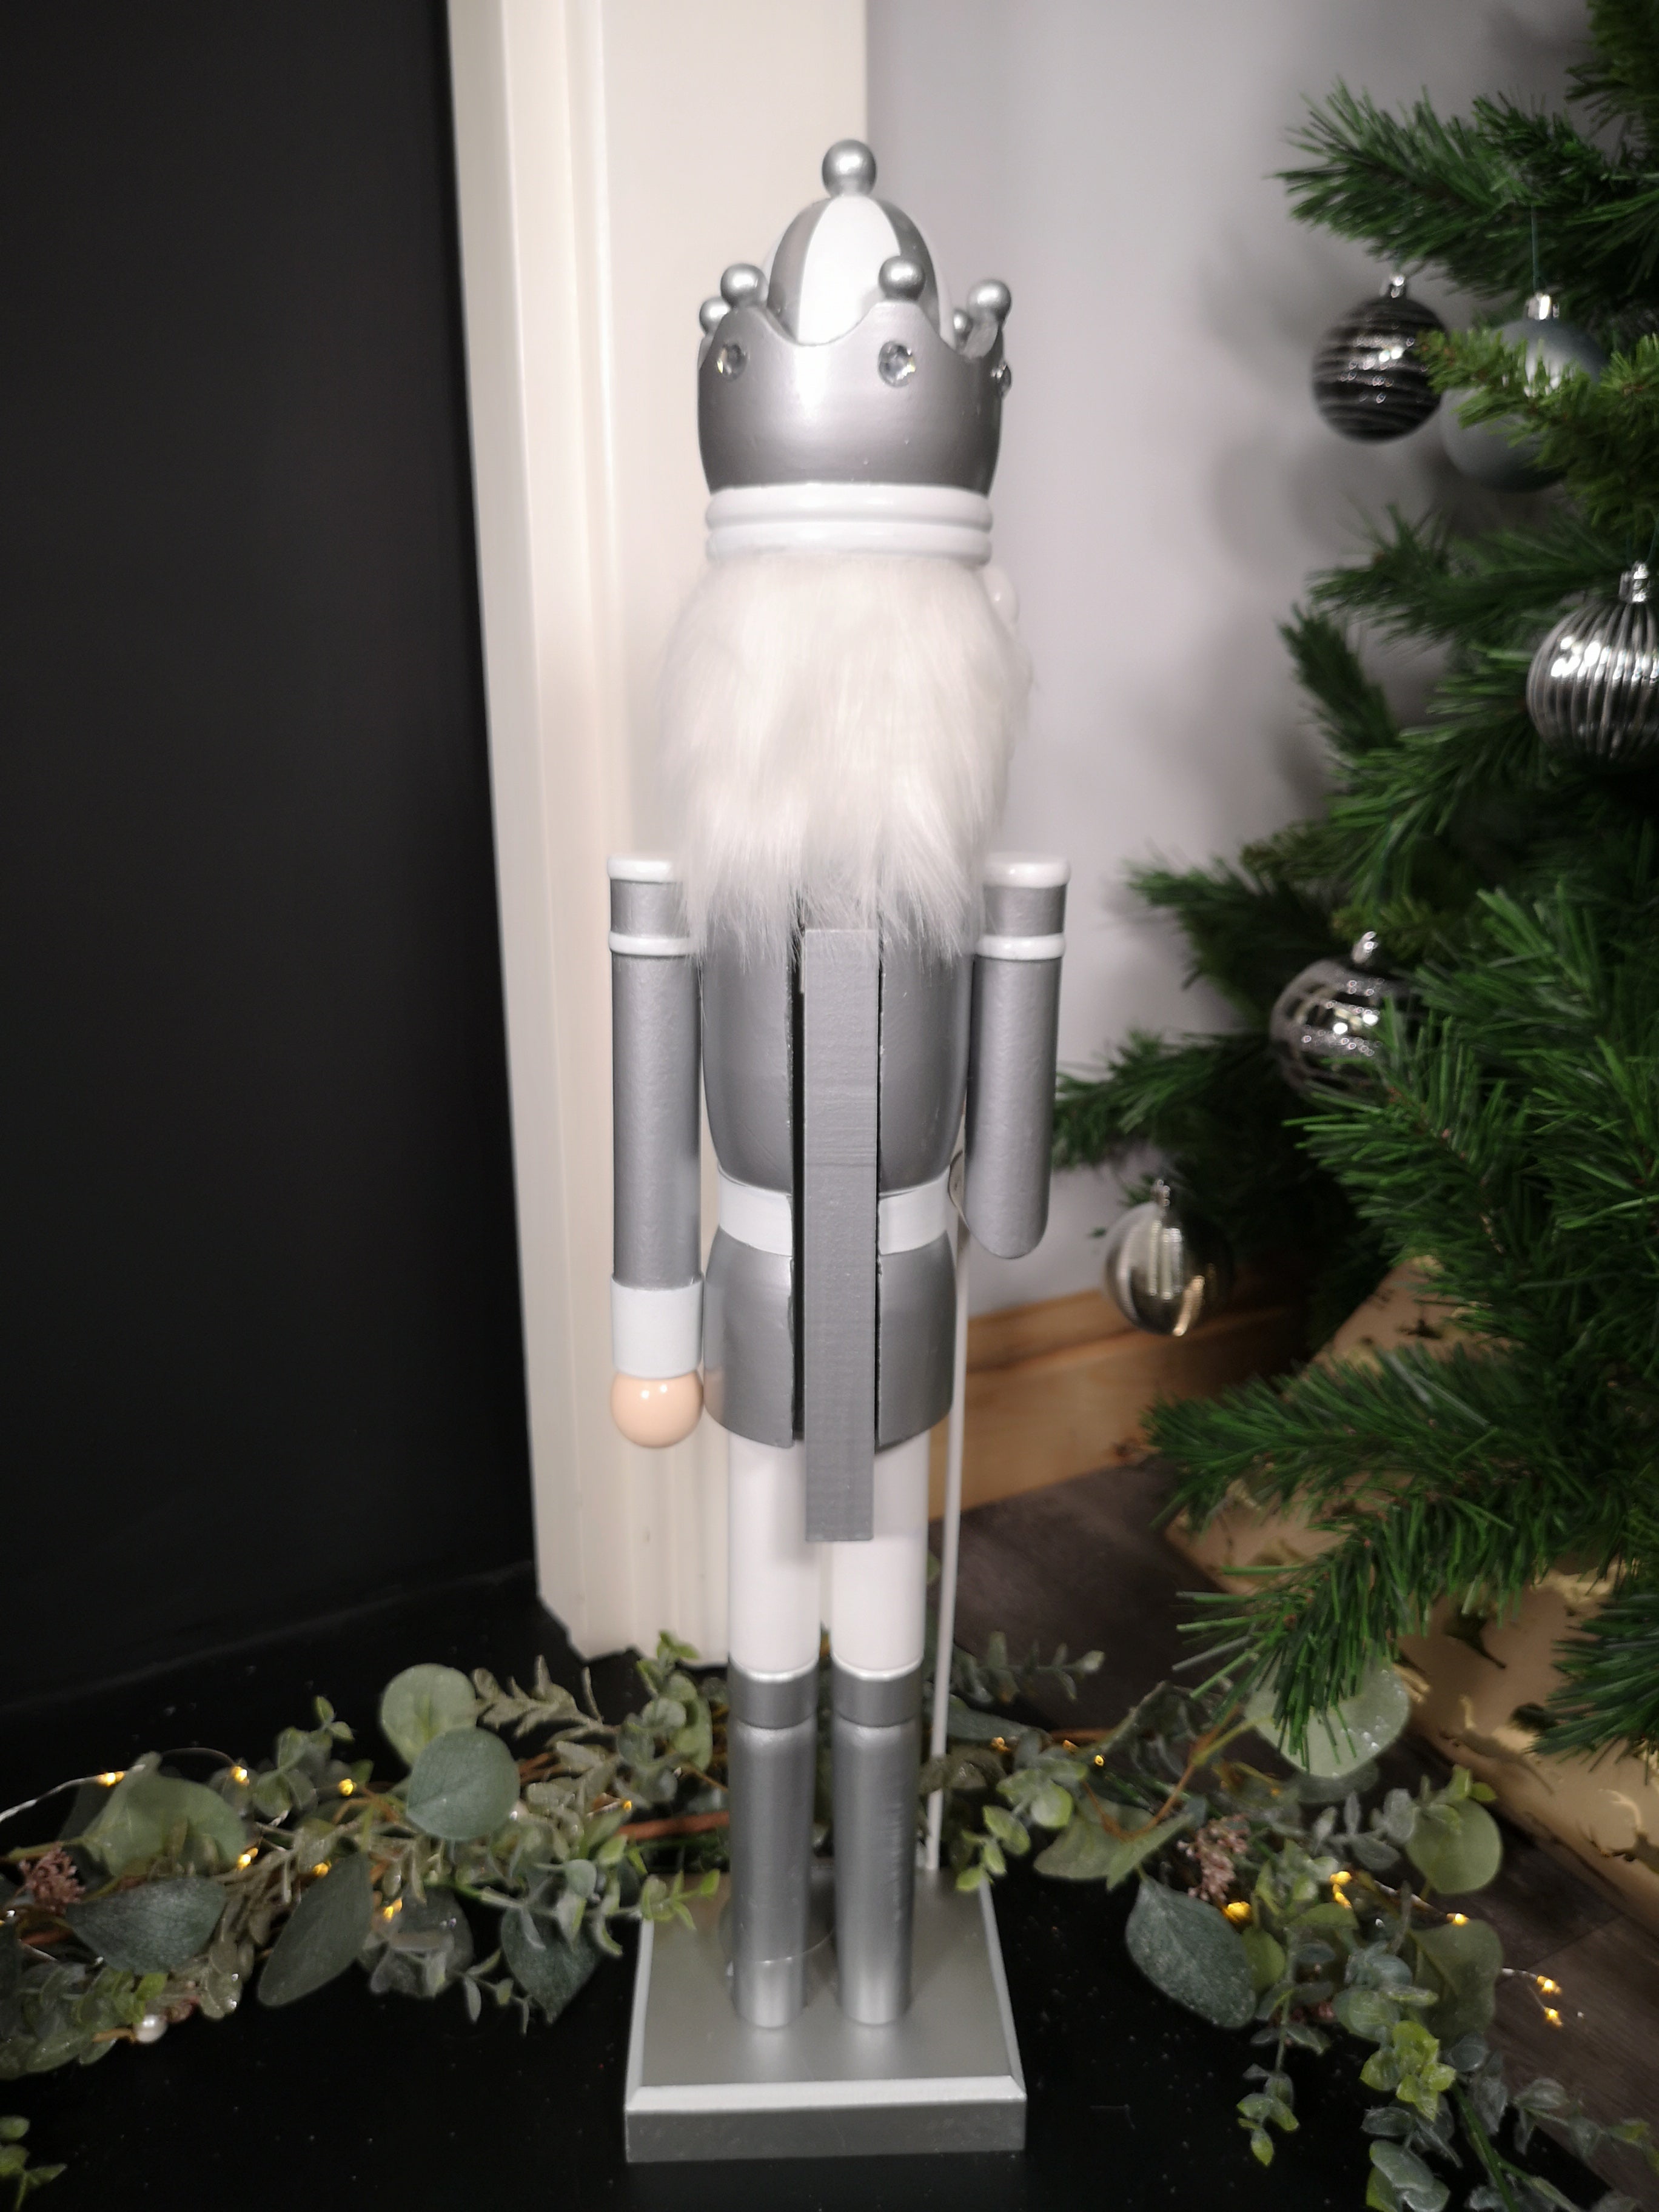 60cm Festive Christmas Wooden Nutcracker Soldier Decoration in Silver and White